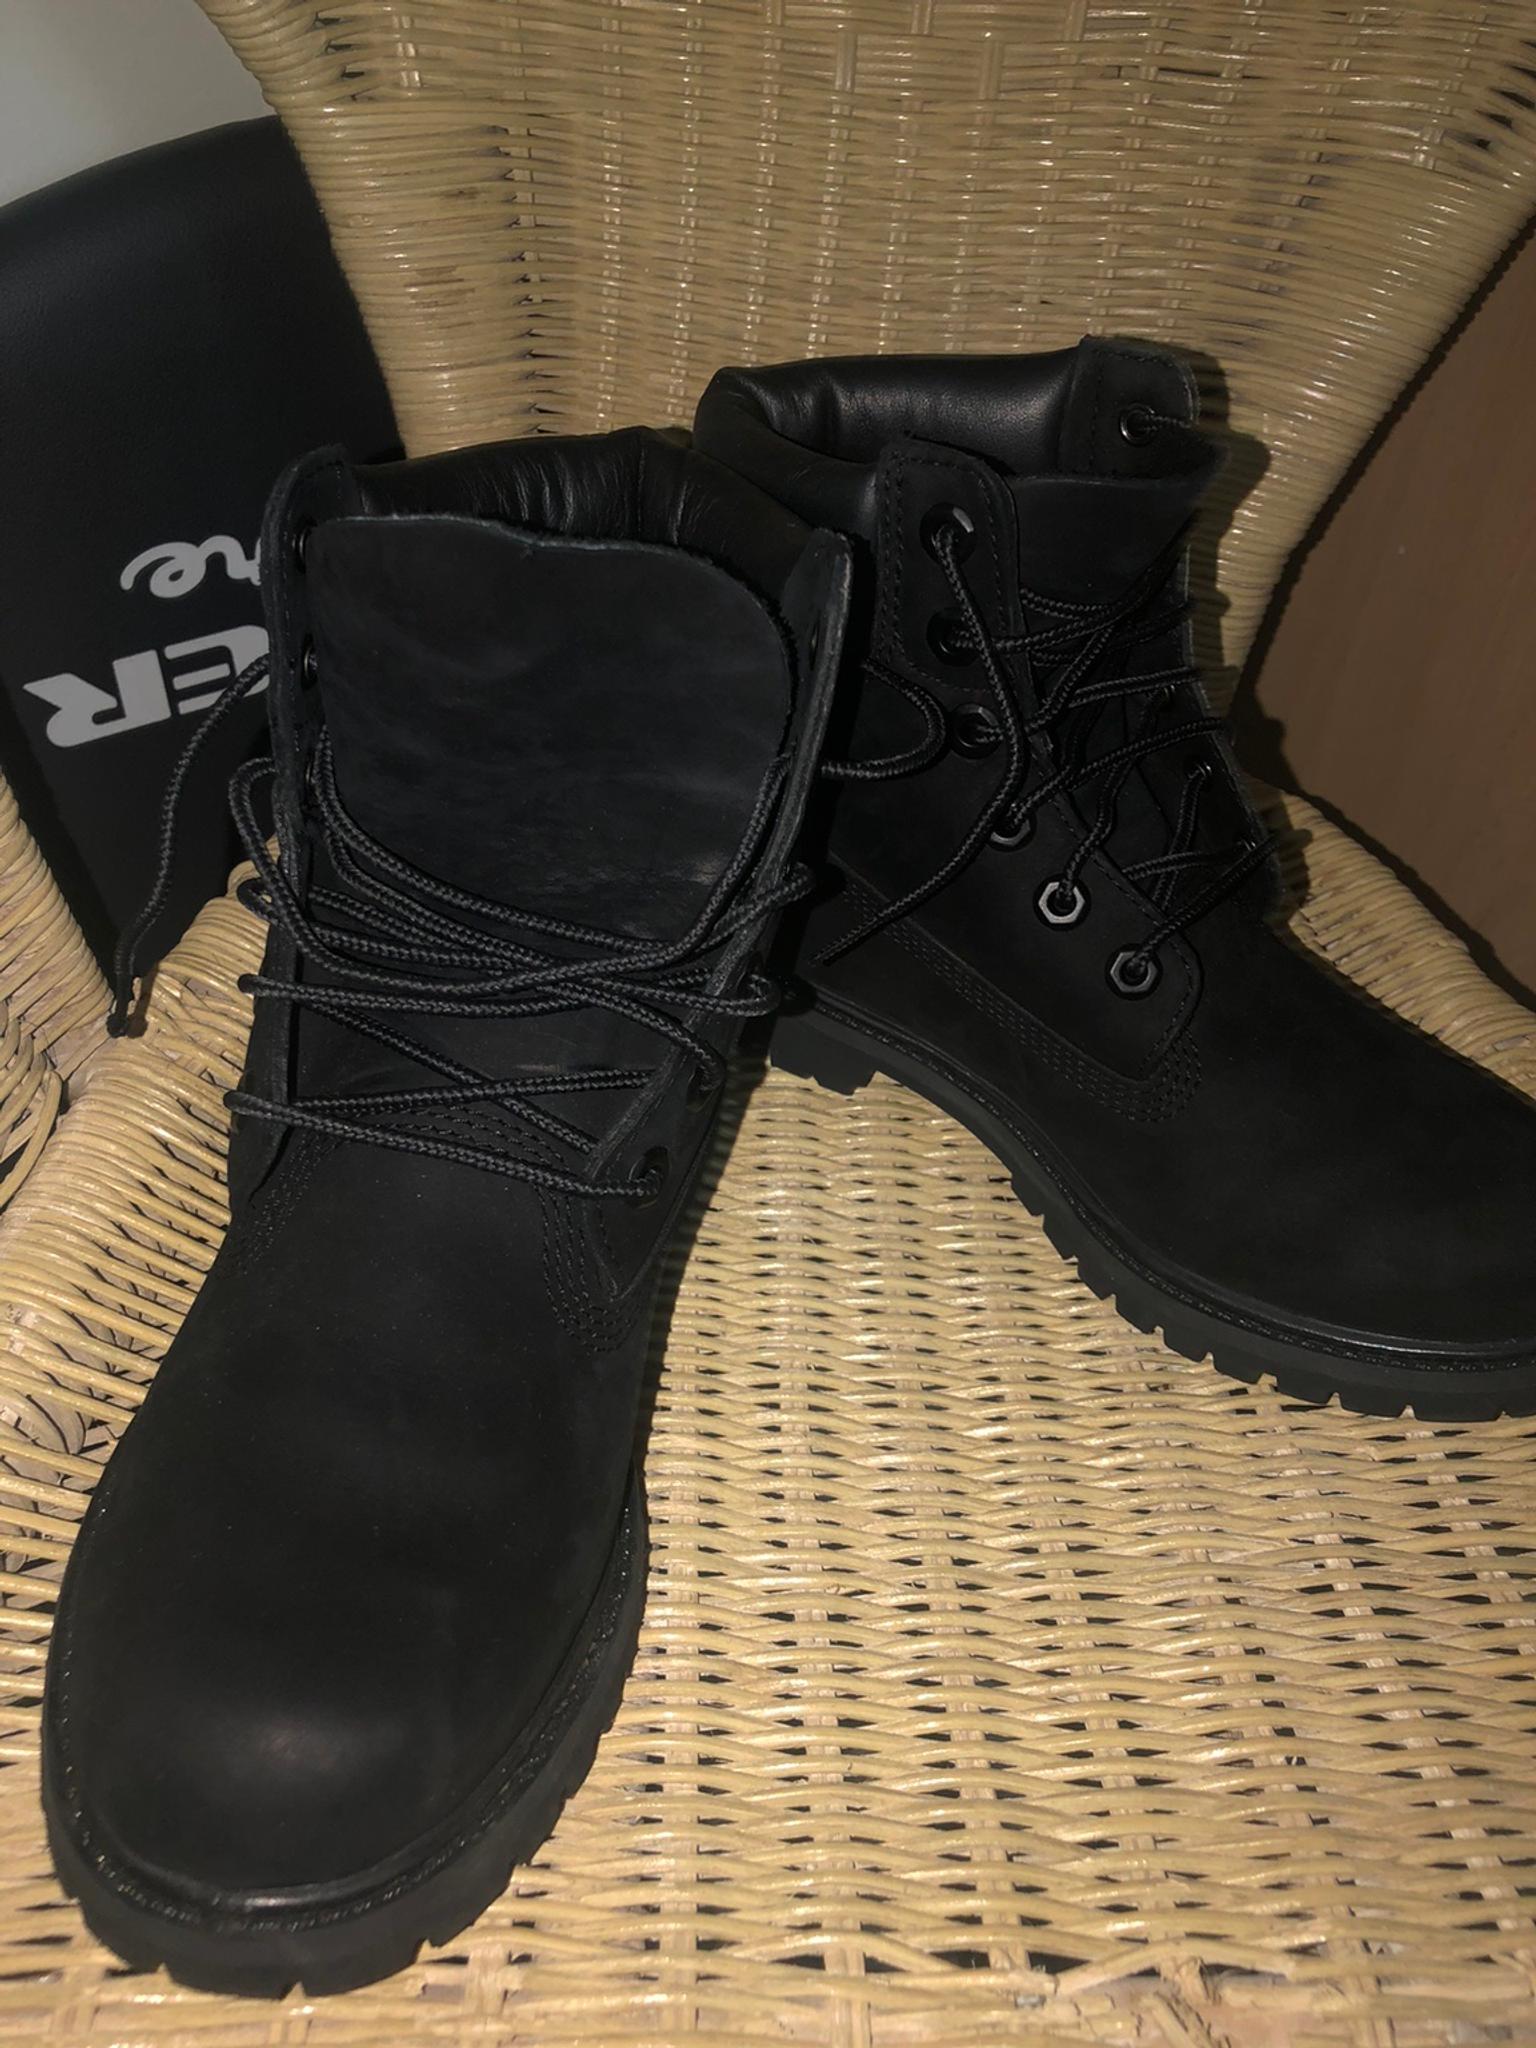 grey timberland boots size 5